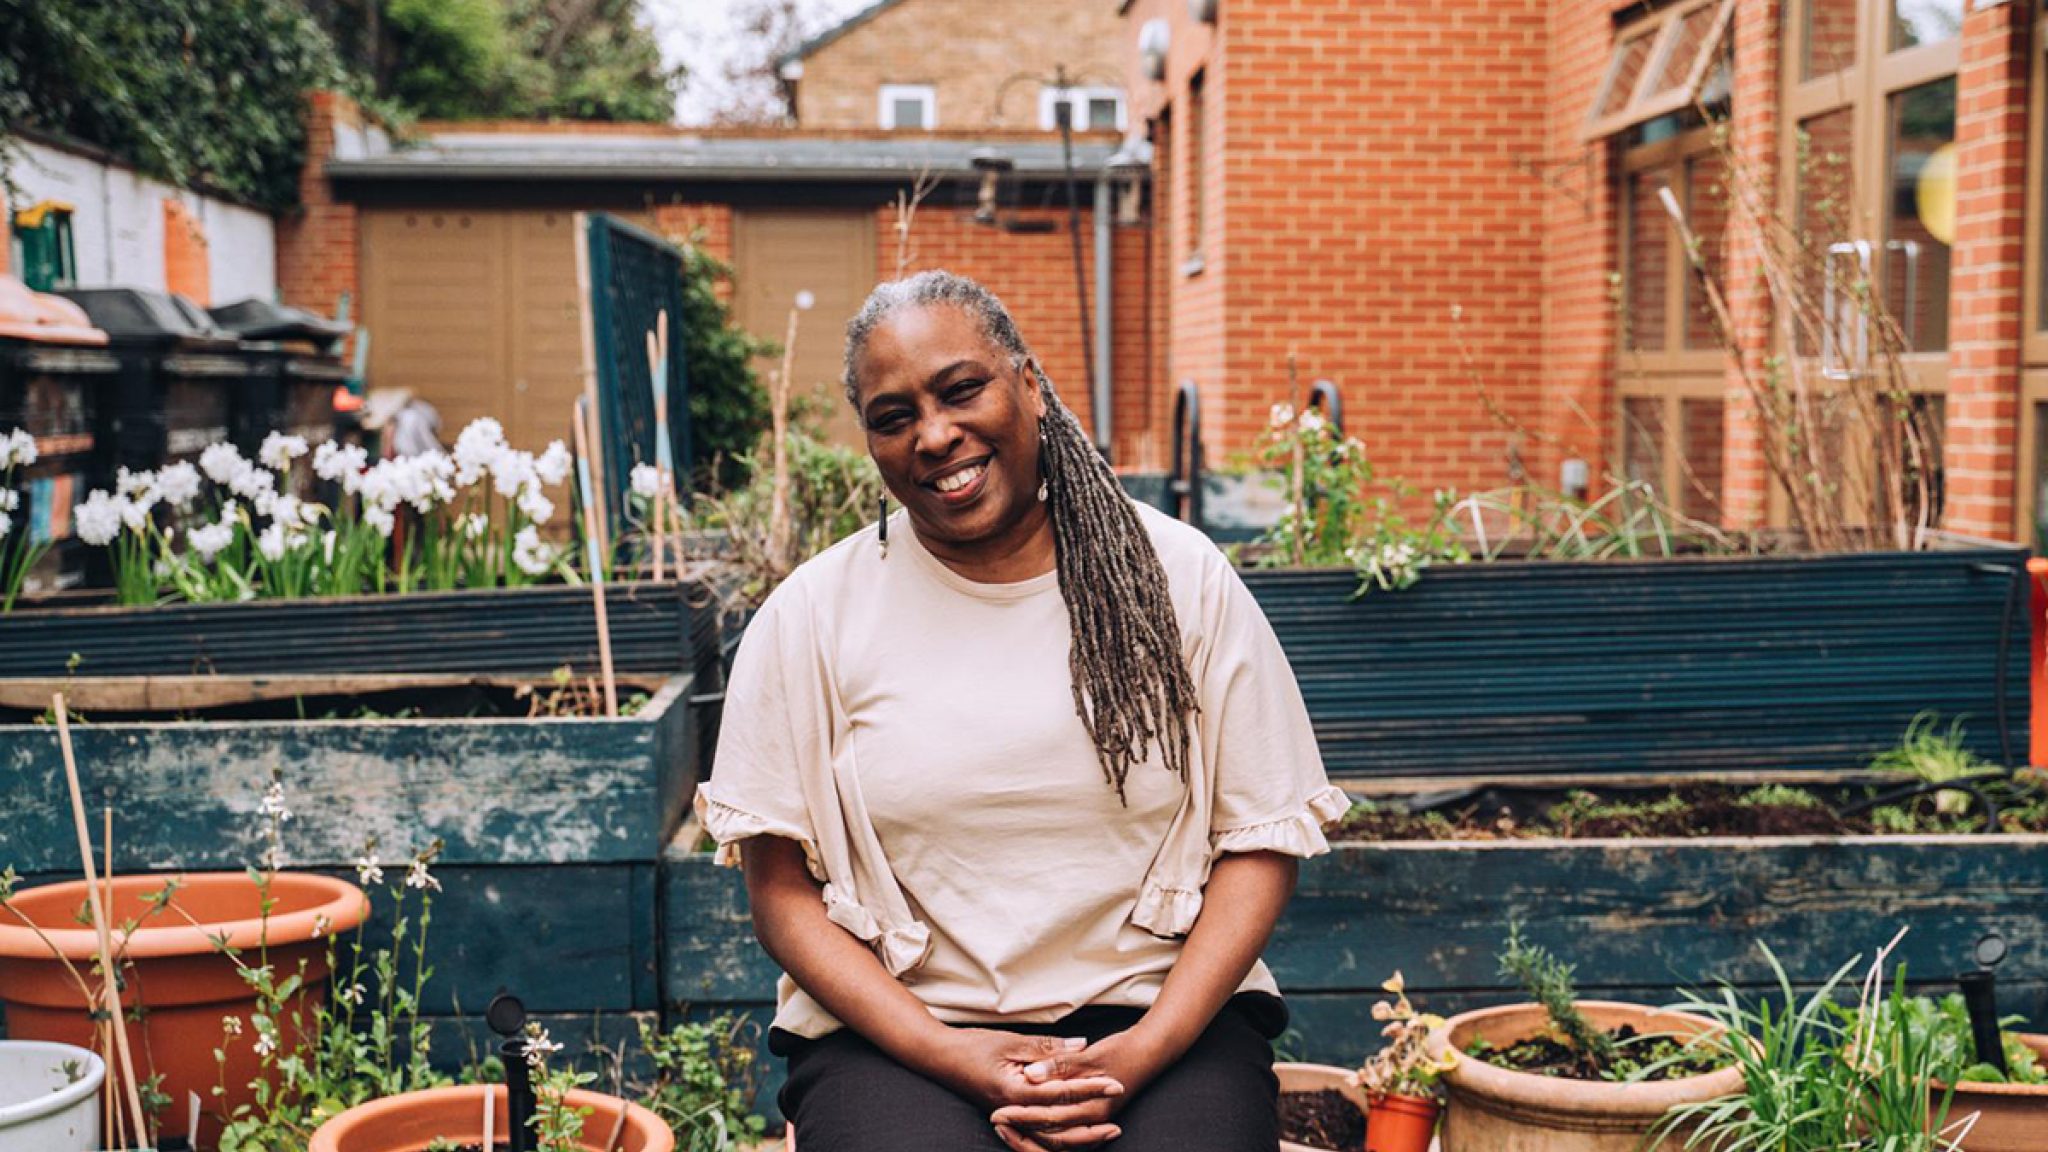 A smiling Black woman sits amid vegetable beds, planters and pots, in a community garden.